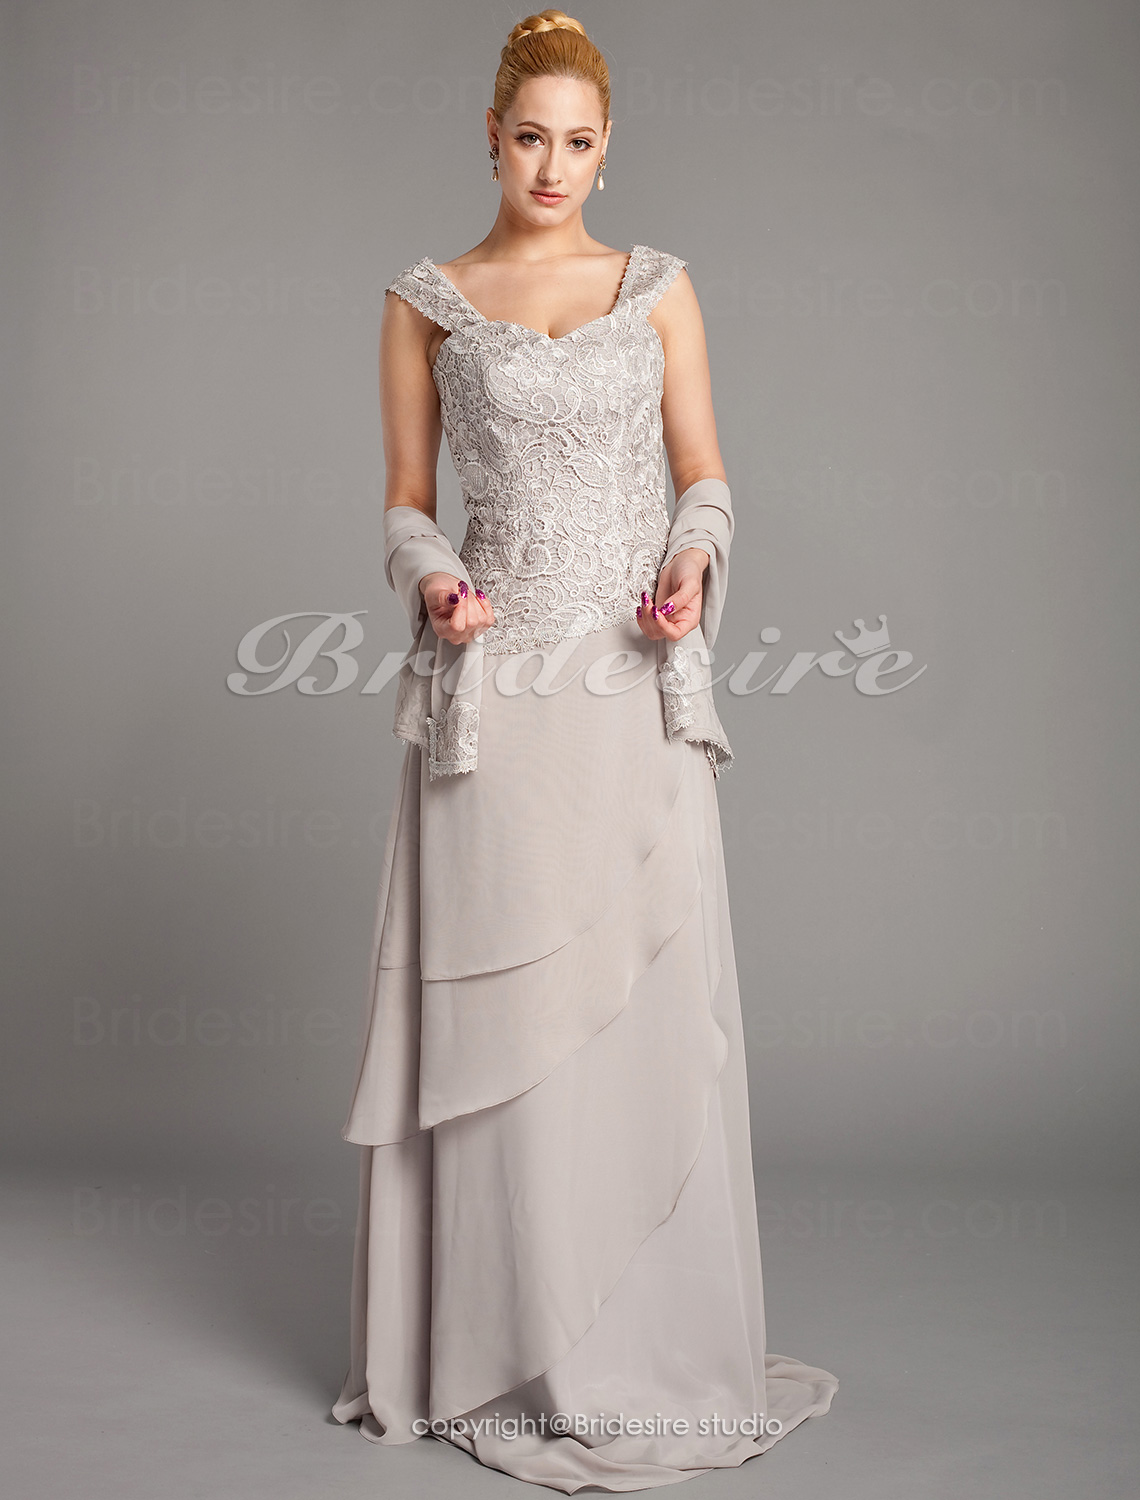 Sheath/Column Chiffon And Lace Floor-length Straps Mother of the Bride Dress With A Wrap